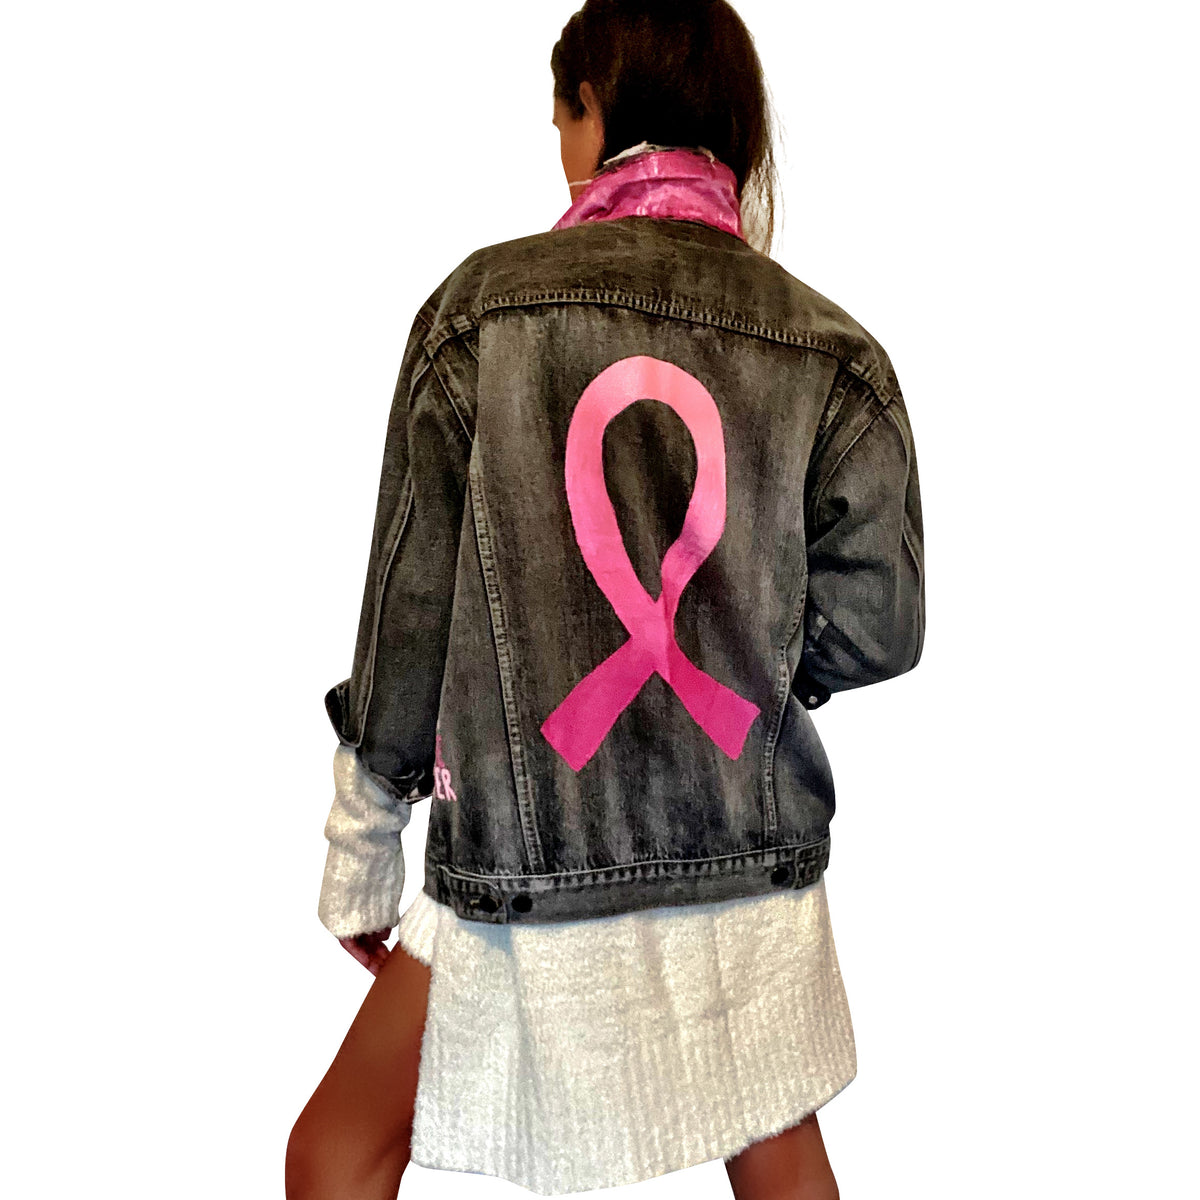 Faded black denim. Pink ombre Breast Cancer ribbon painted in large on back. Love, Strength, Trust, Beauty, Peace, Hope, Passion, Faith, Power painted in light & bright pink on the front. Collar painted in pink ombre. Signed @wrenandglory.